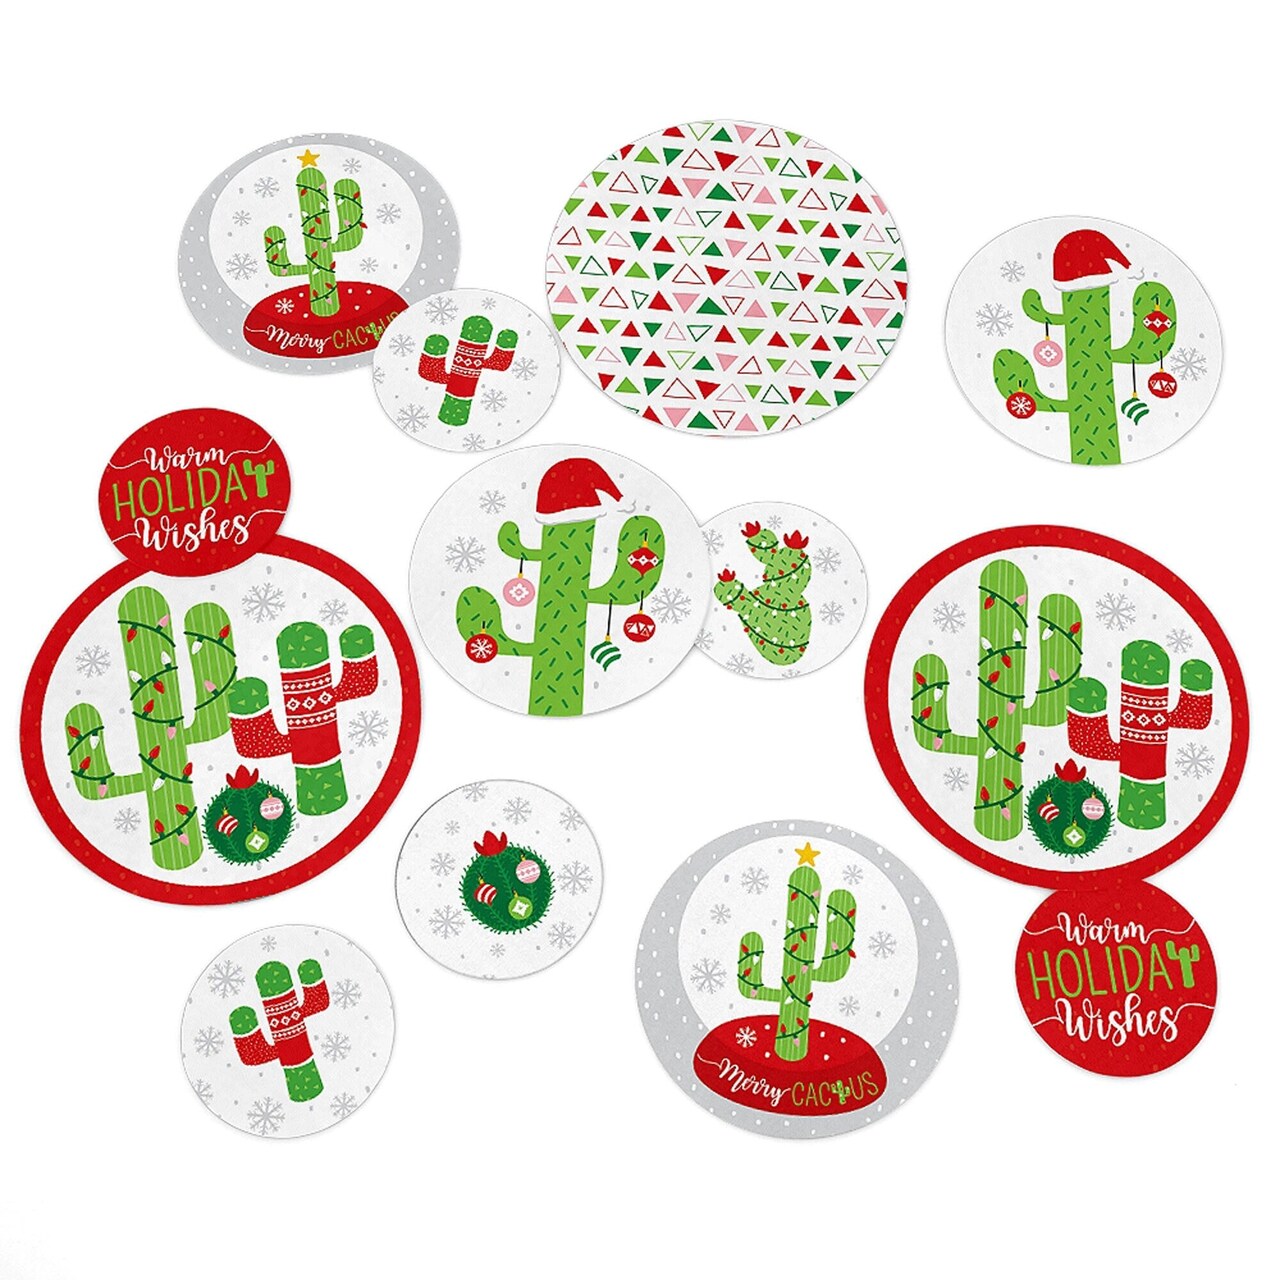 Big Dot of Happiness Merry Cactus - Christmas Cactus Party Giant Circle Confetti - Party Decorations - Large Confetti 27 Count